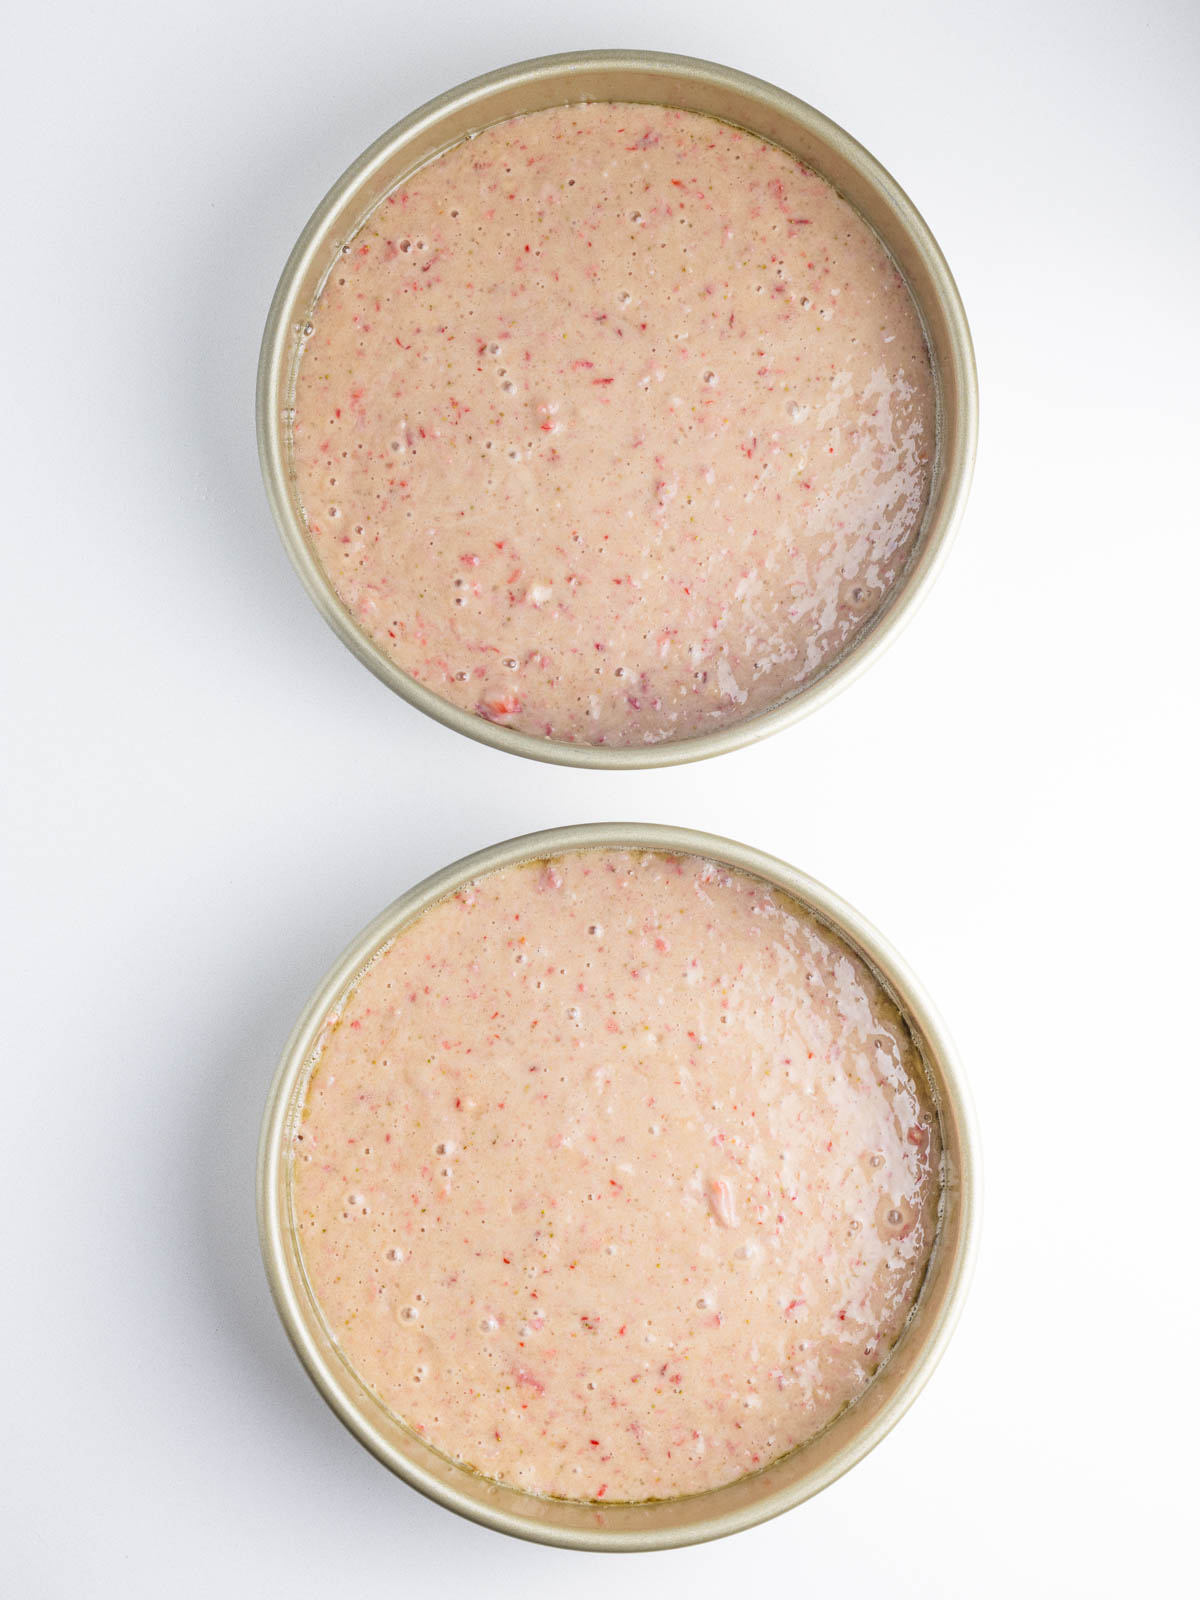 Strawberry cake batter in two cake pans lined up vertically in the frame.